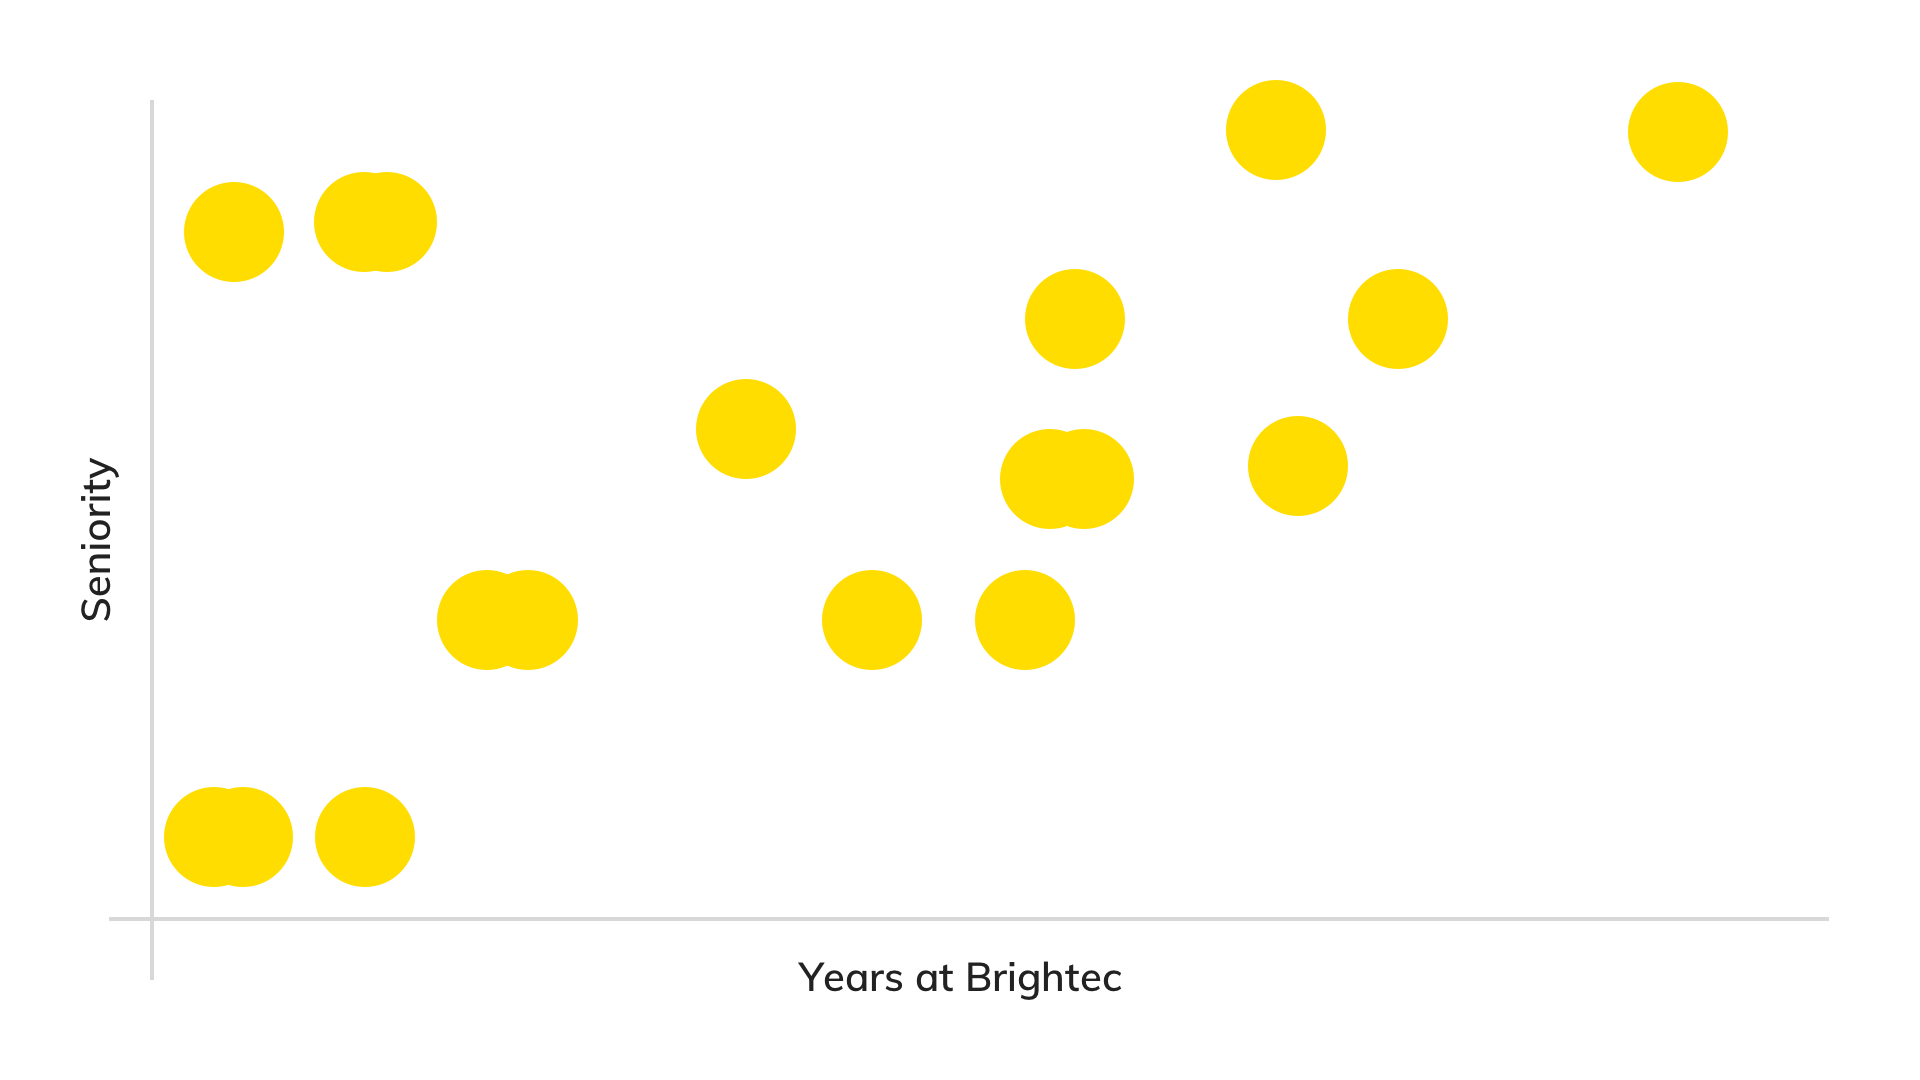 A scatter graph depicting the distribution of values when looking at staff seniority and years at Brightec.